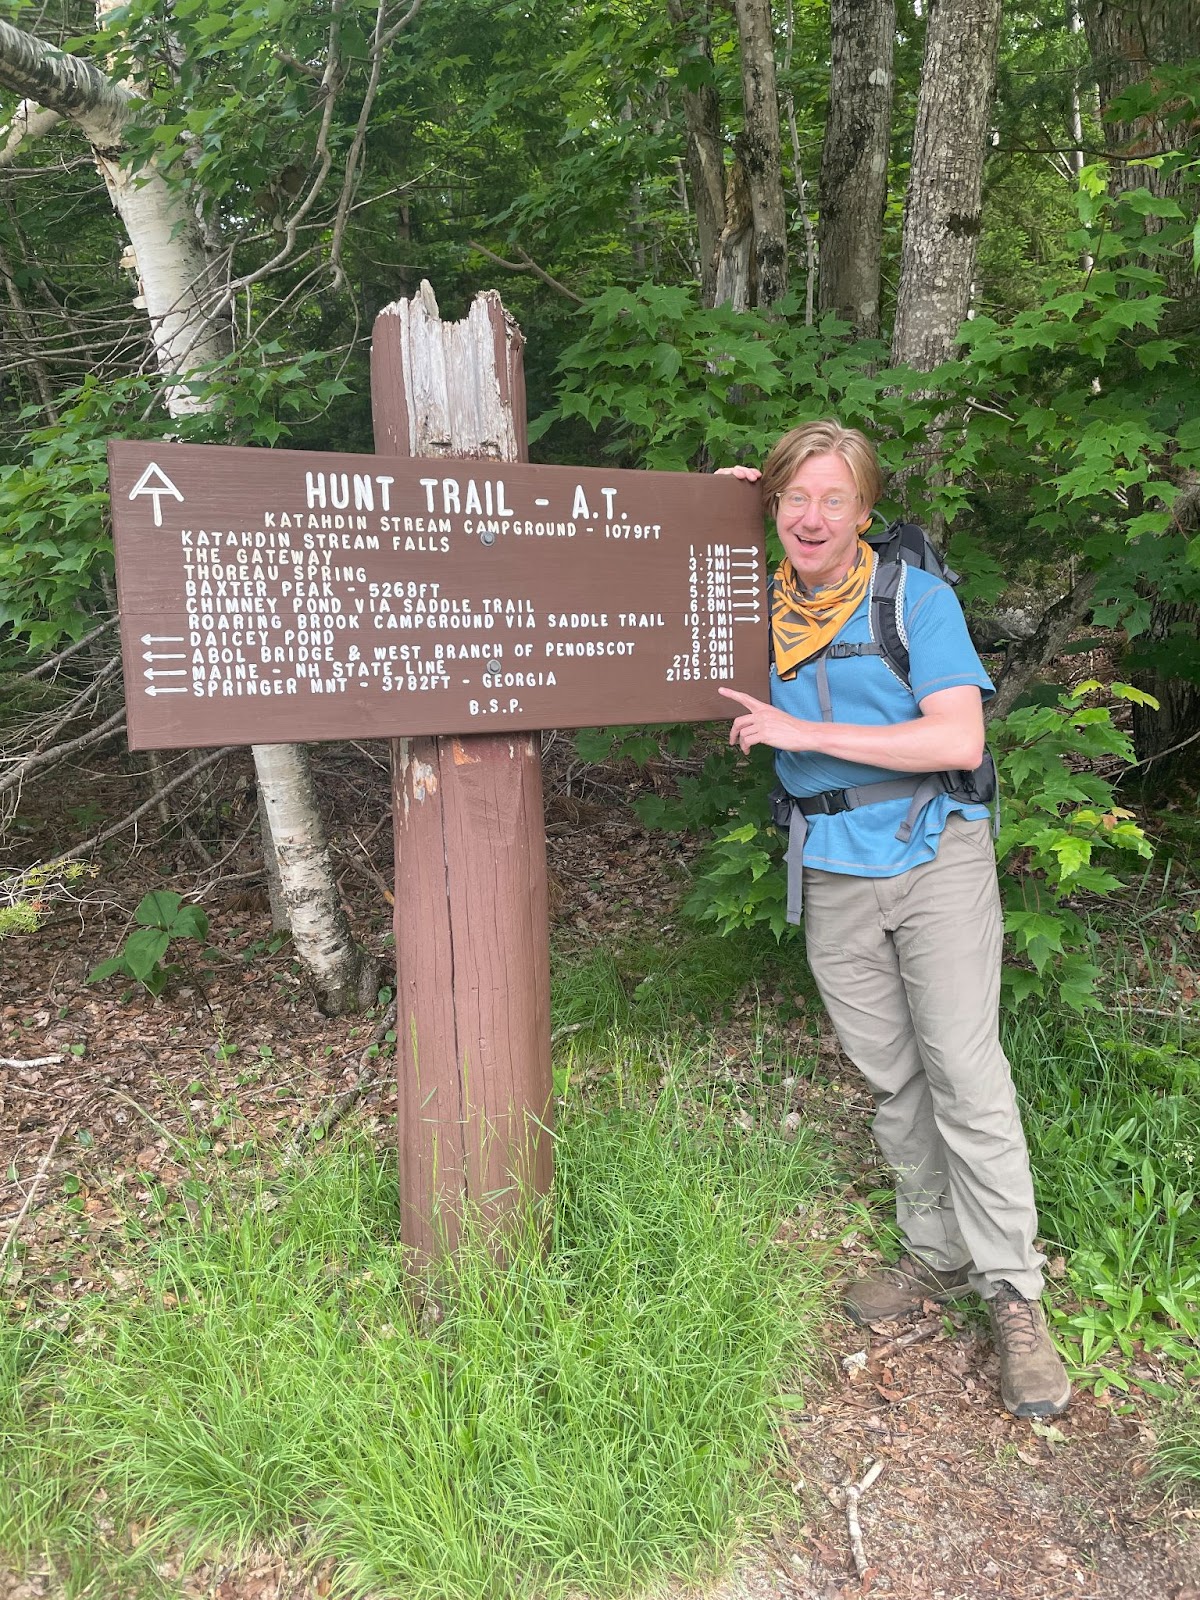 Photograph of a man standing in a forest next to a brown trailhead sign